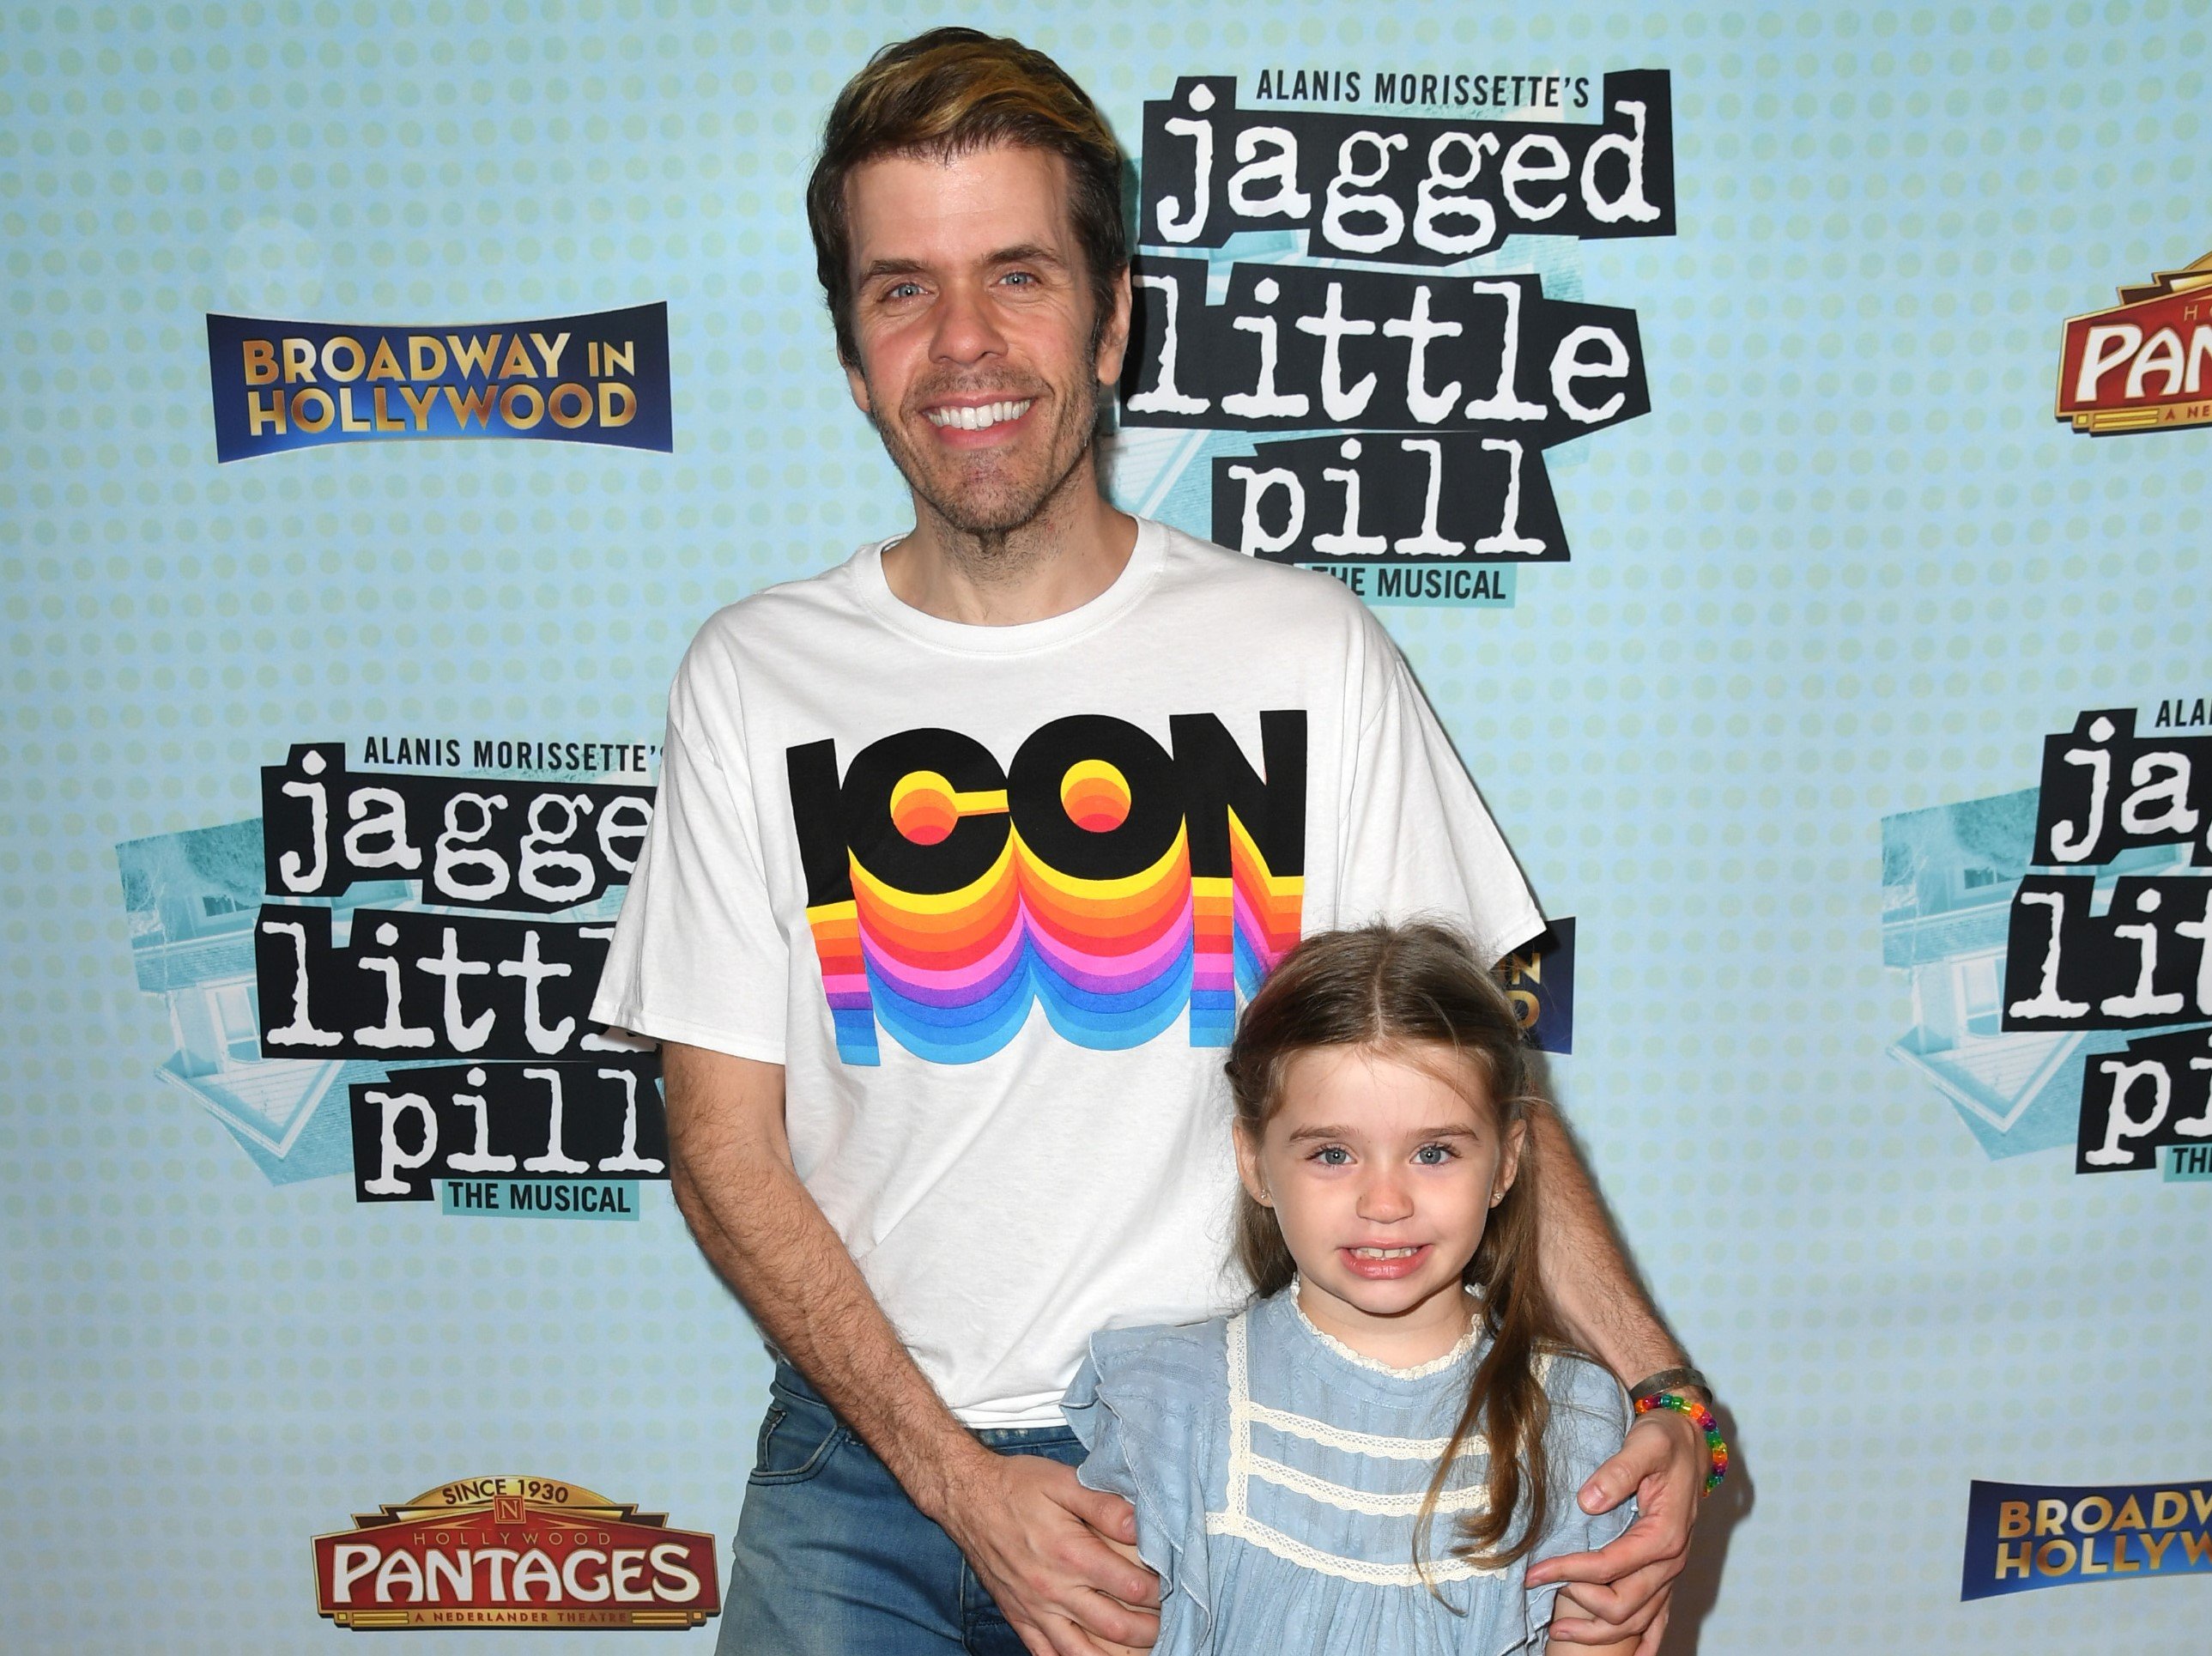 Perez Hilton and daughter Mia Alma Lavandeira attend the Los Angeles Premiere of "Jagged Little Pill" at Hollywood Pantages Theatre on September 14, 2022 in Hollywood, California. | JC Olivera/Getty Images